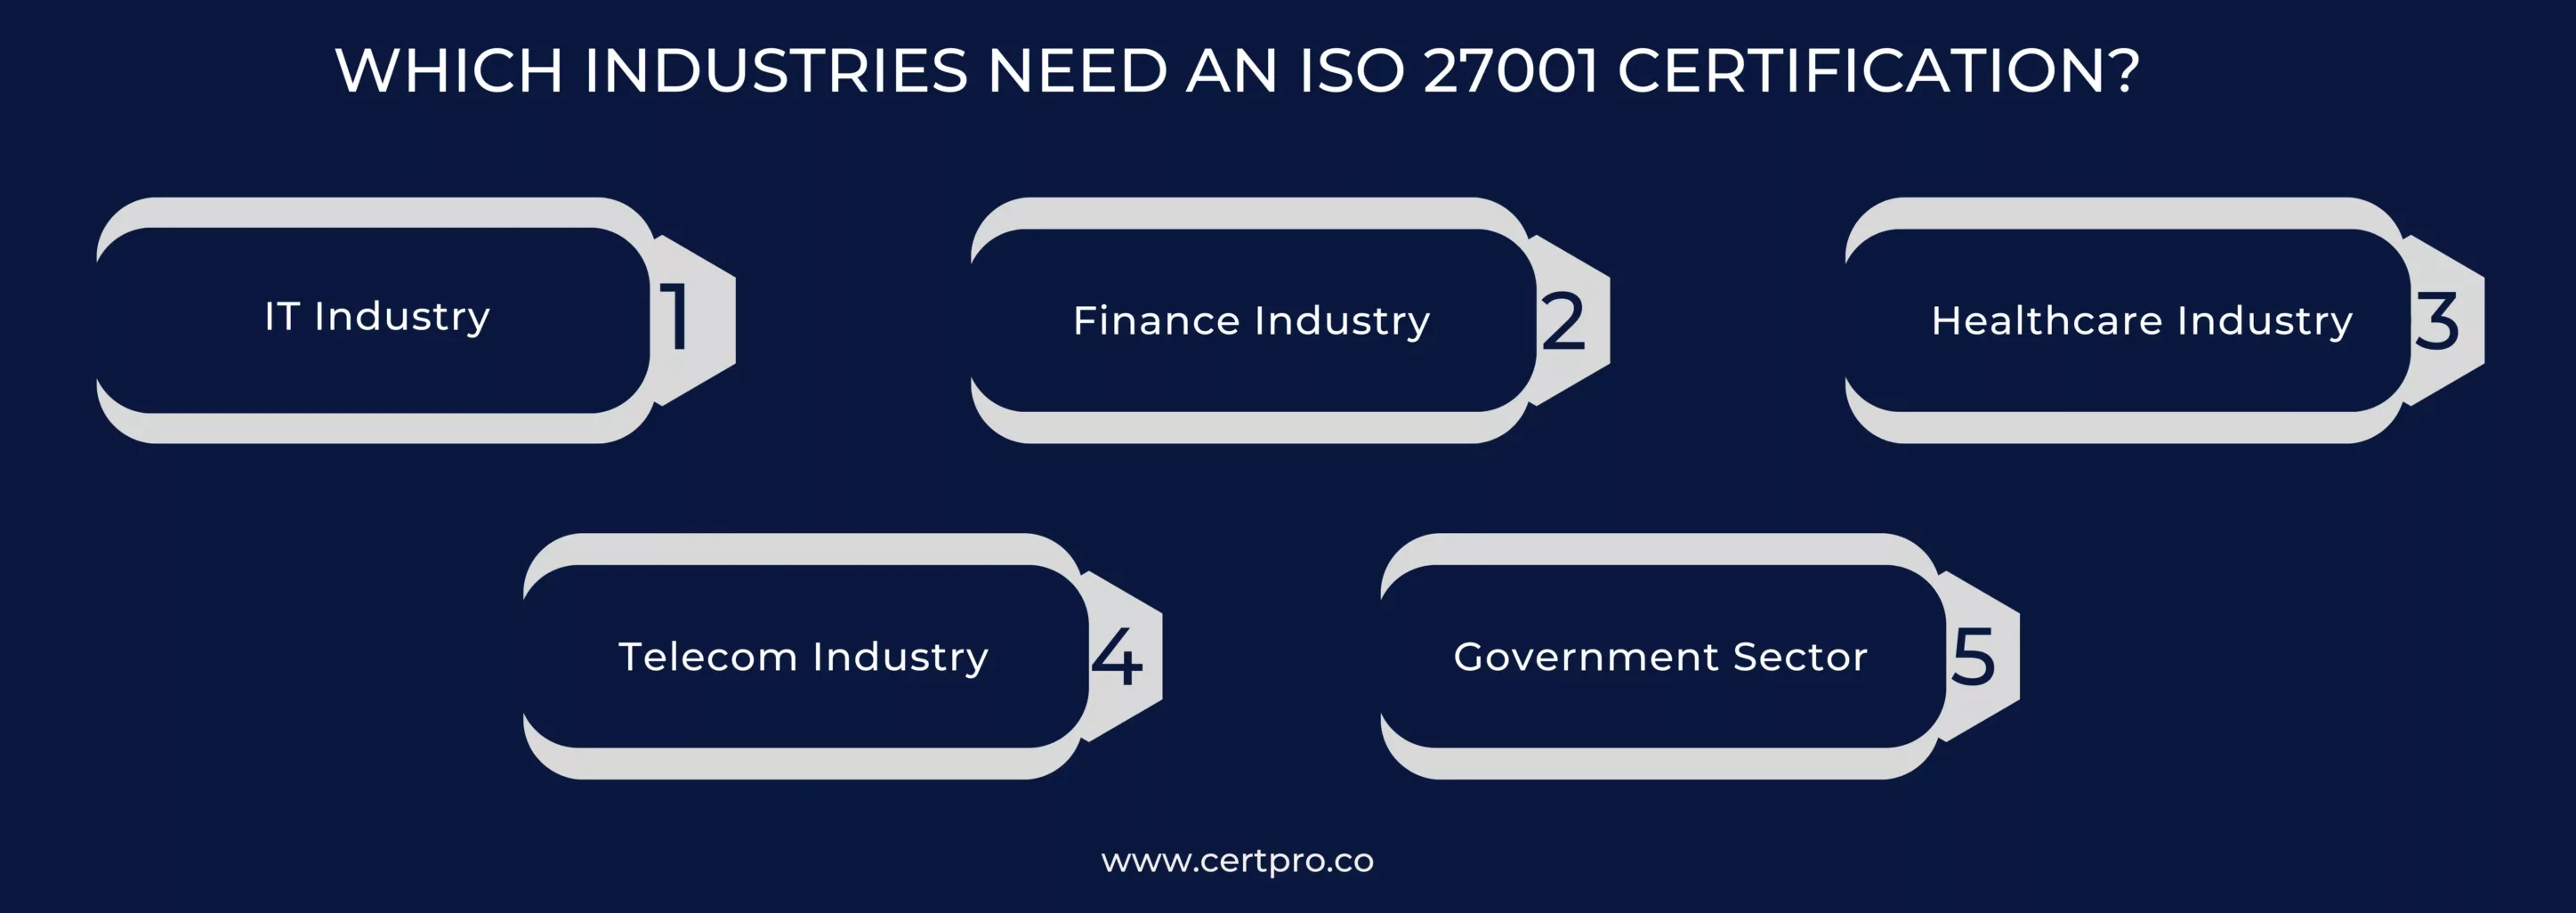 WHICH INDUSTRIES NEED AN ISO 27001 CERTIFICATION